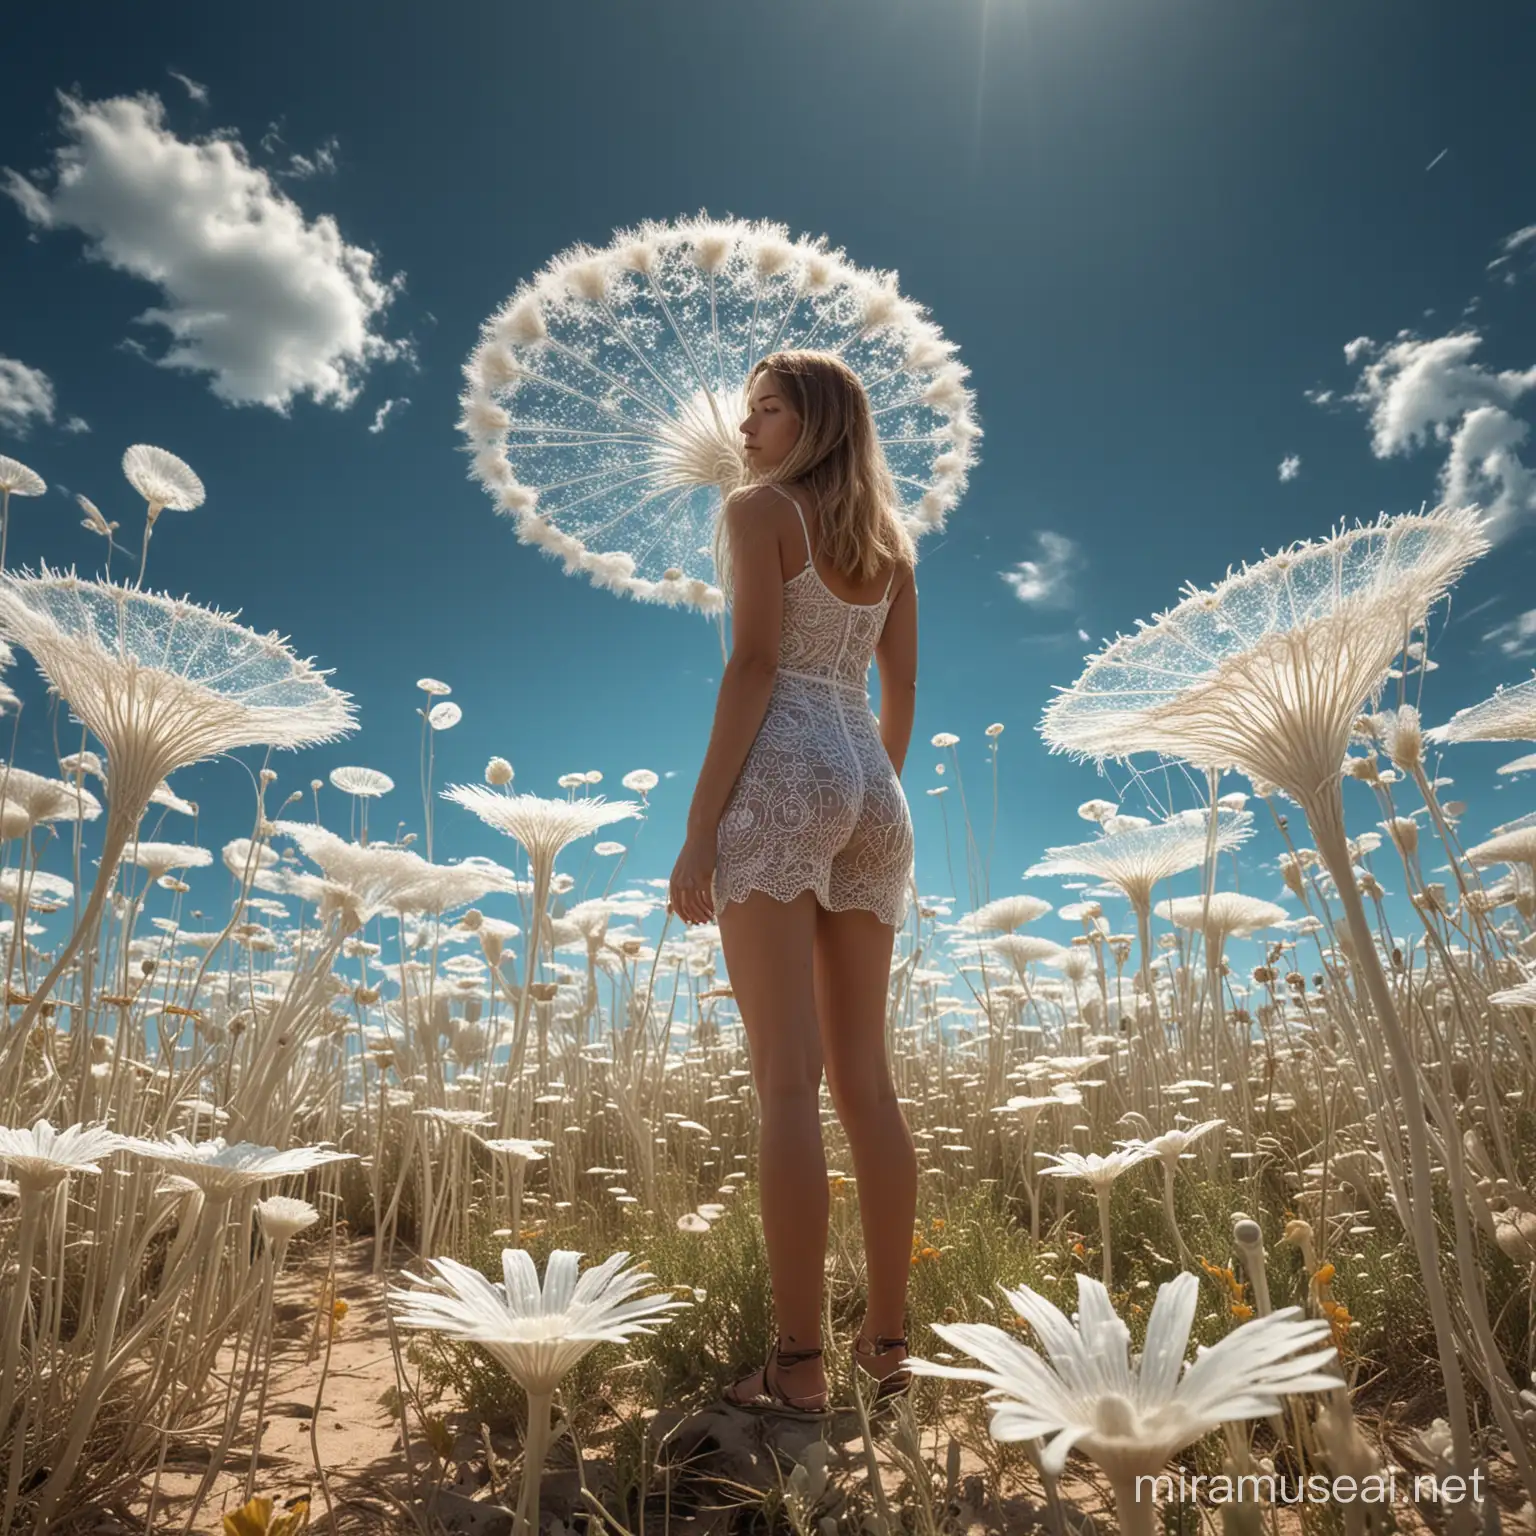 The sky is clear, a few clouds can be seen, A strong summer wind bends the plants of an alien landscape of enlarged Fractals, Diatoms and mostly distorted Radiolara, real look hand,longger  straight leg beauty woman, Add some discrete places in the foreground for people to add later, Show depth 